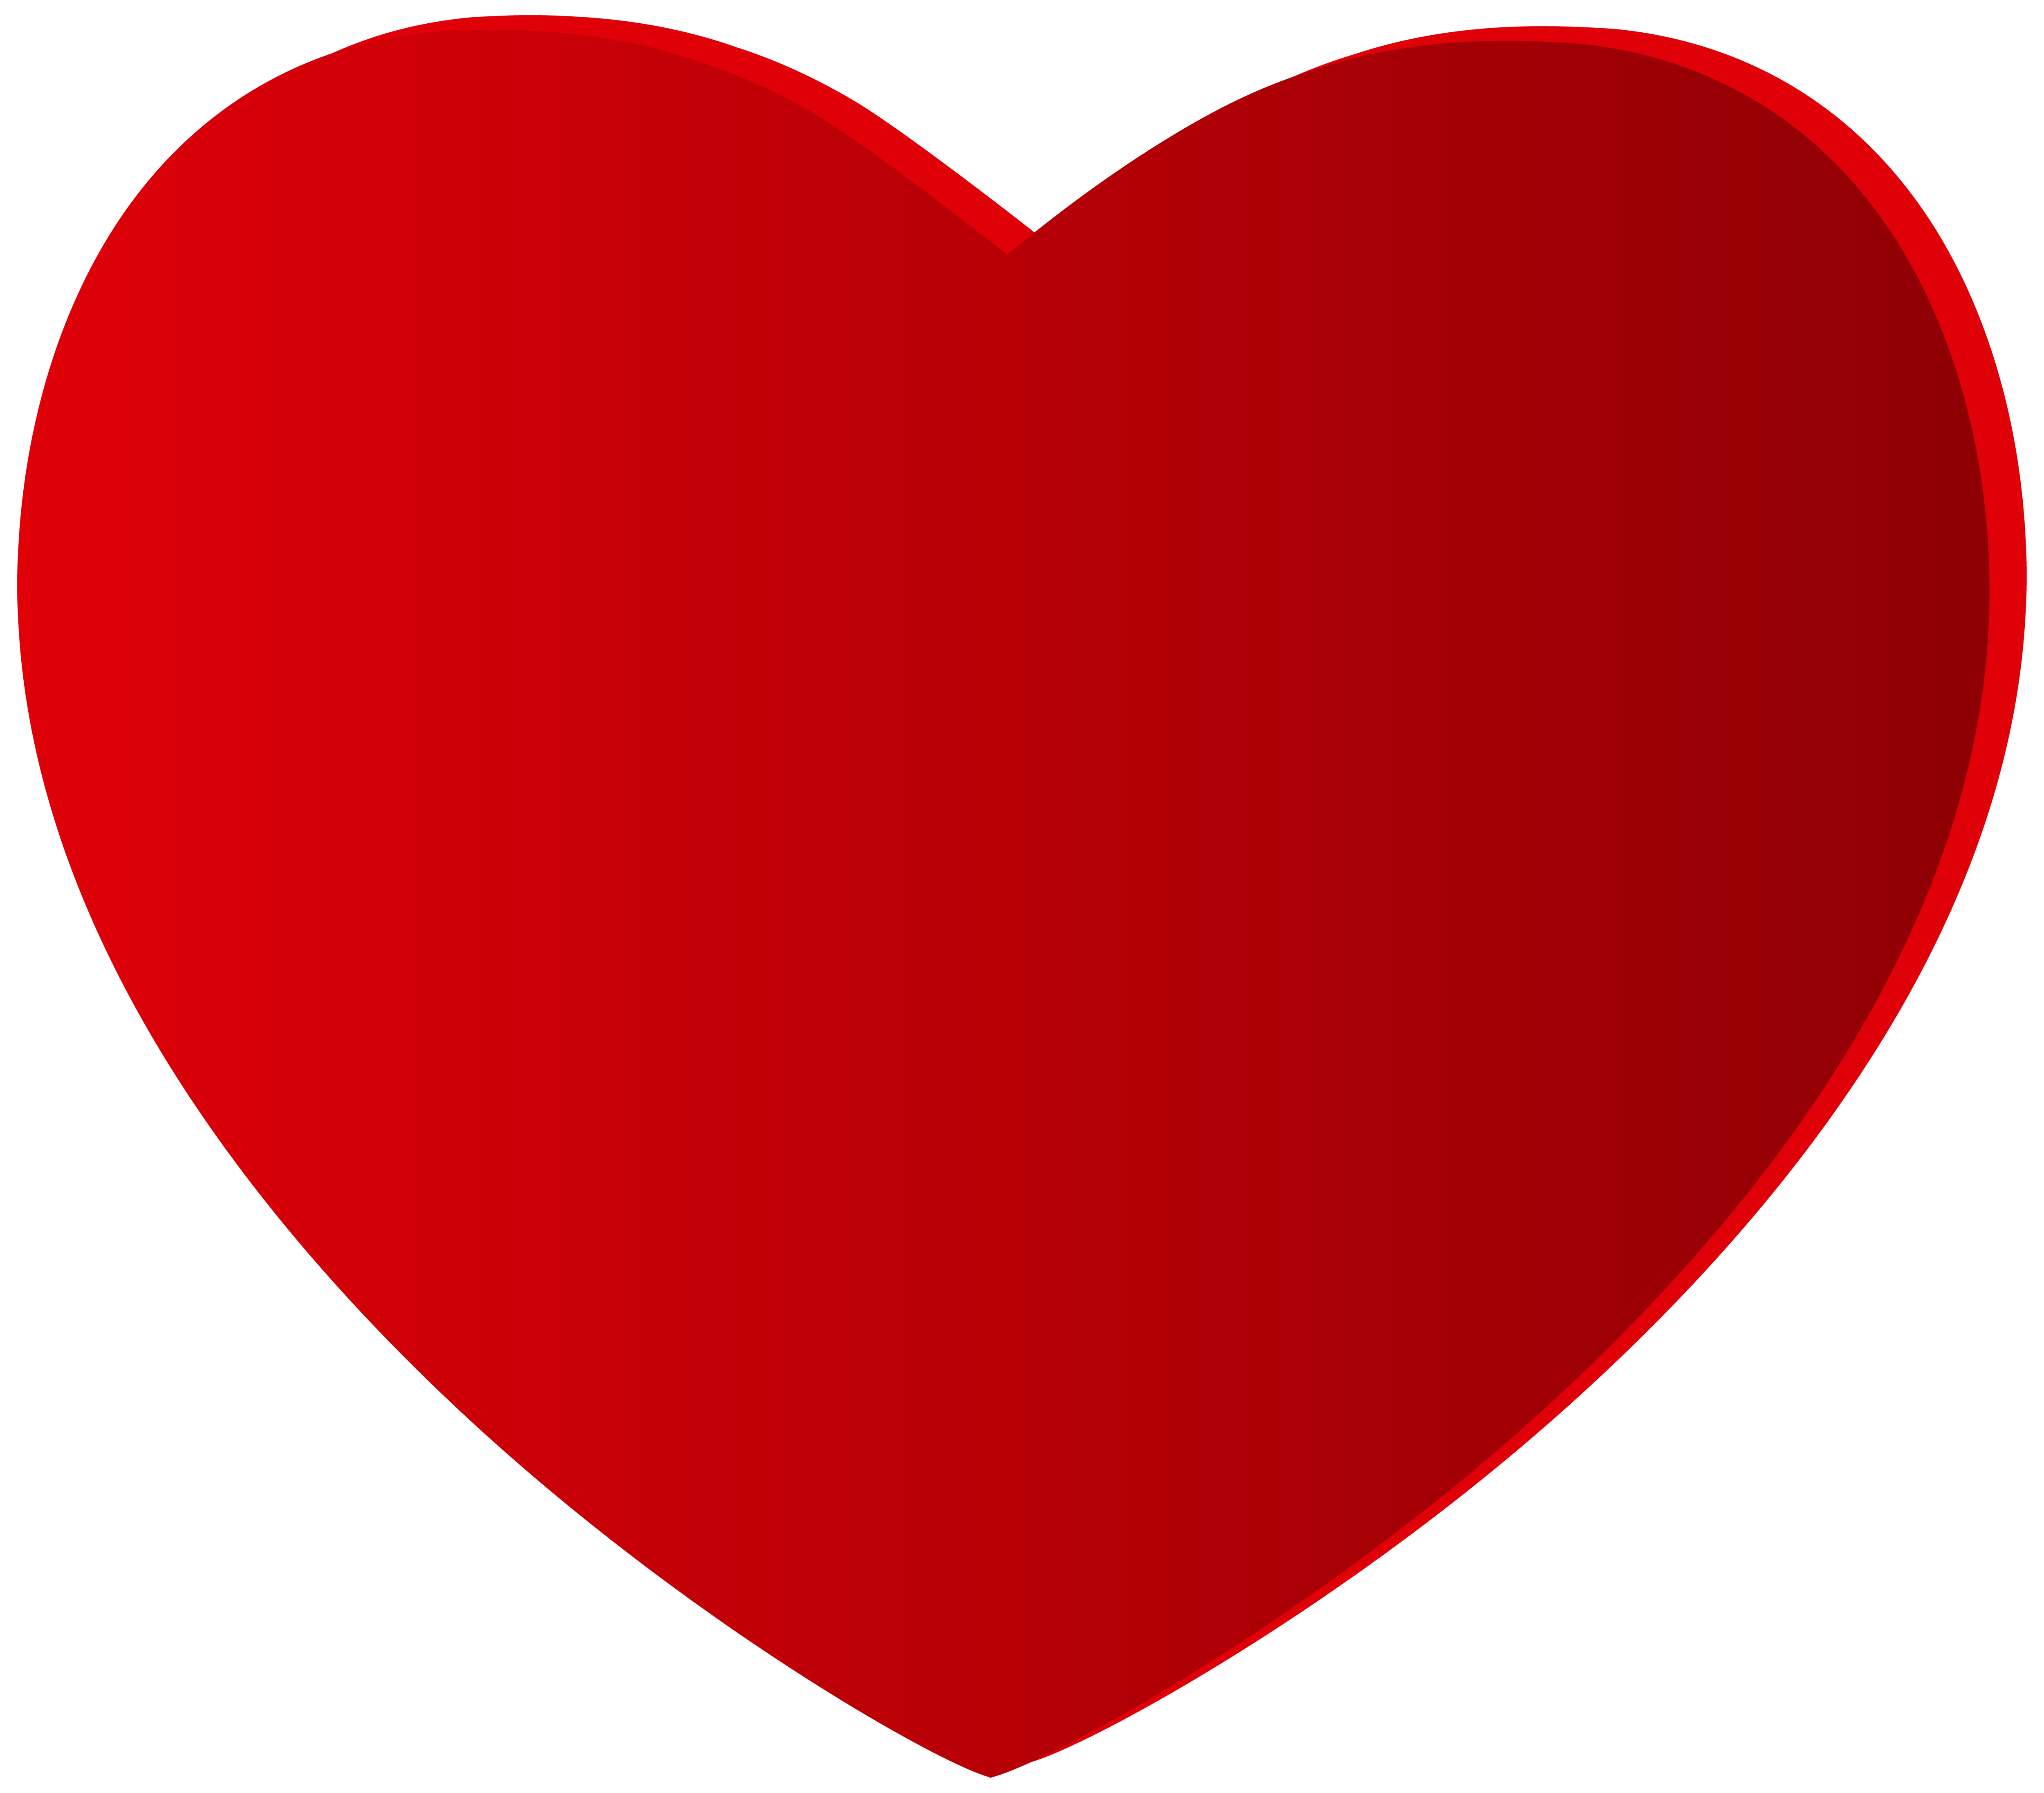 Red Heart PNG HD